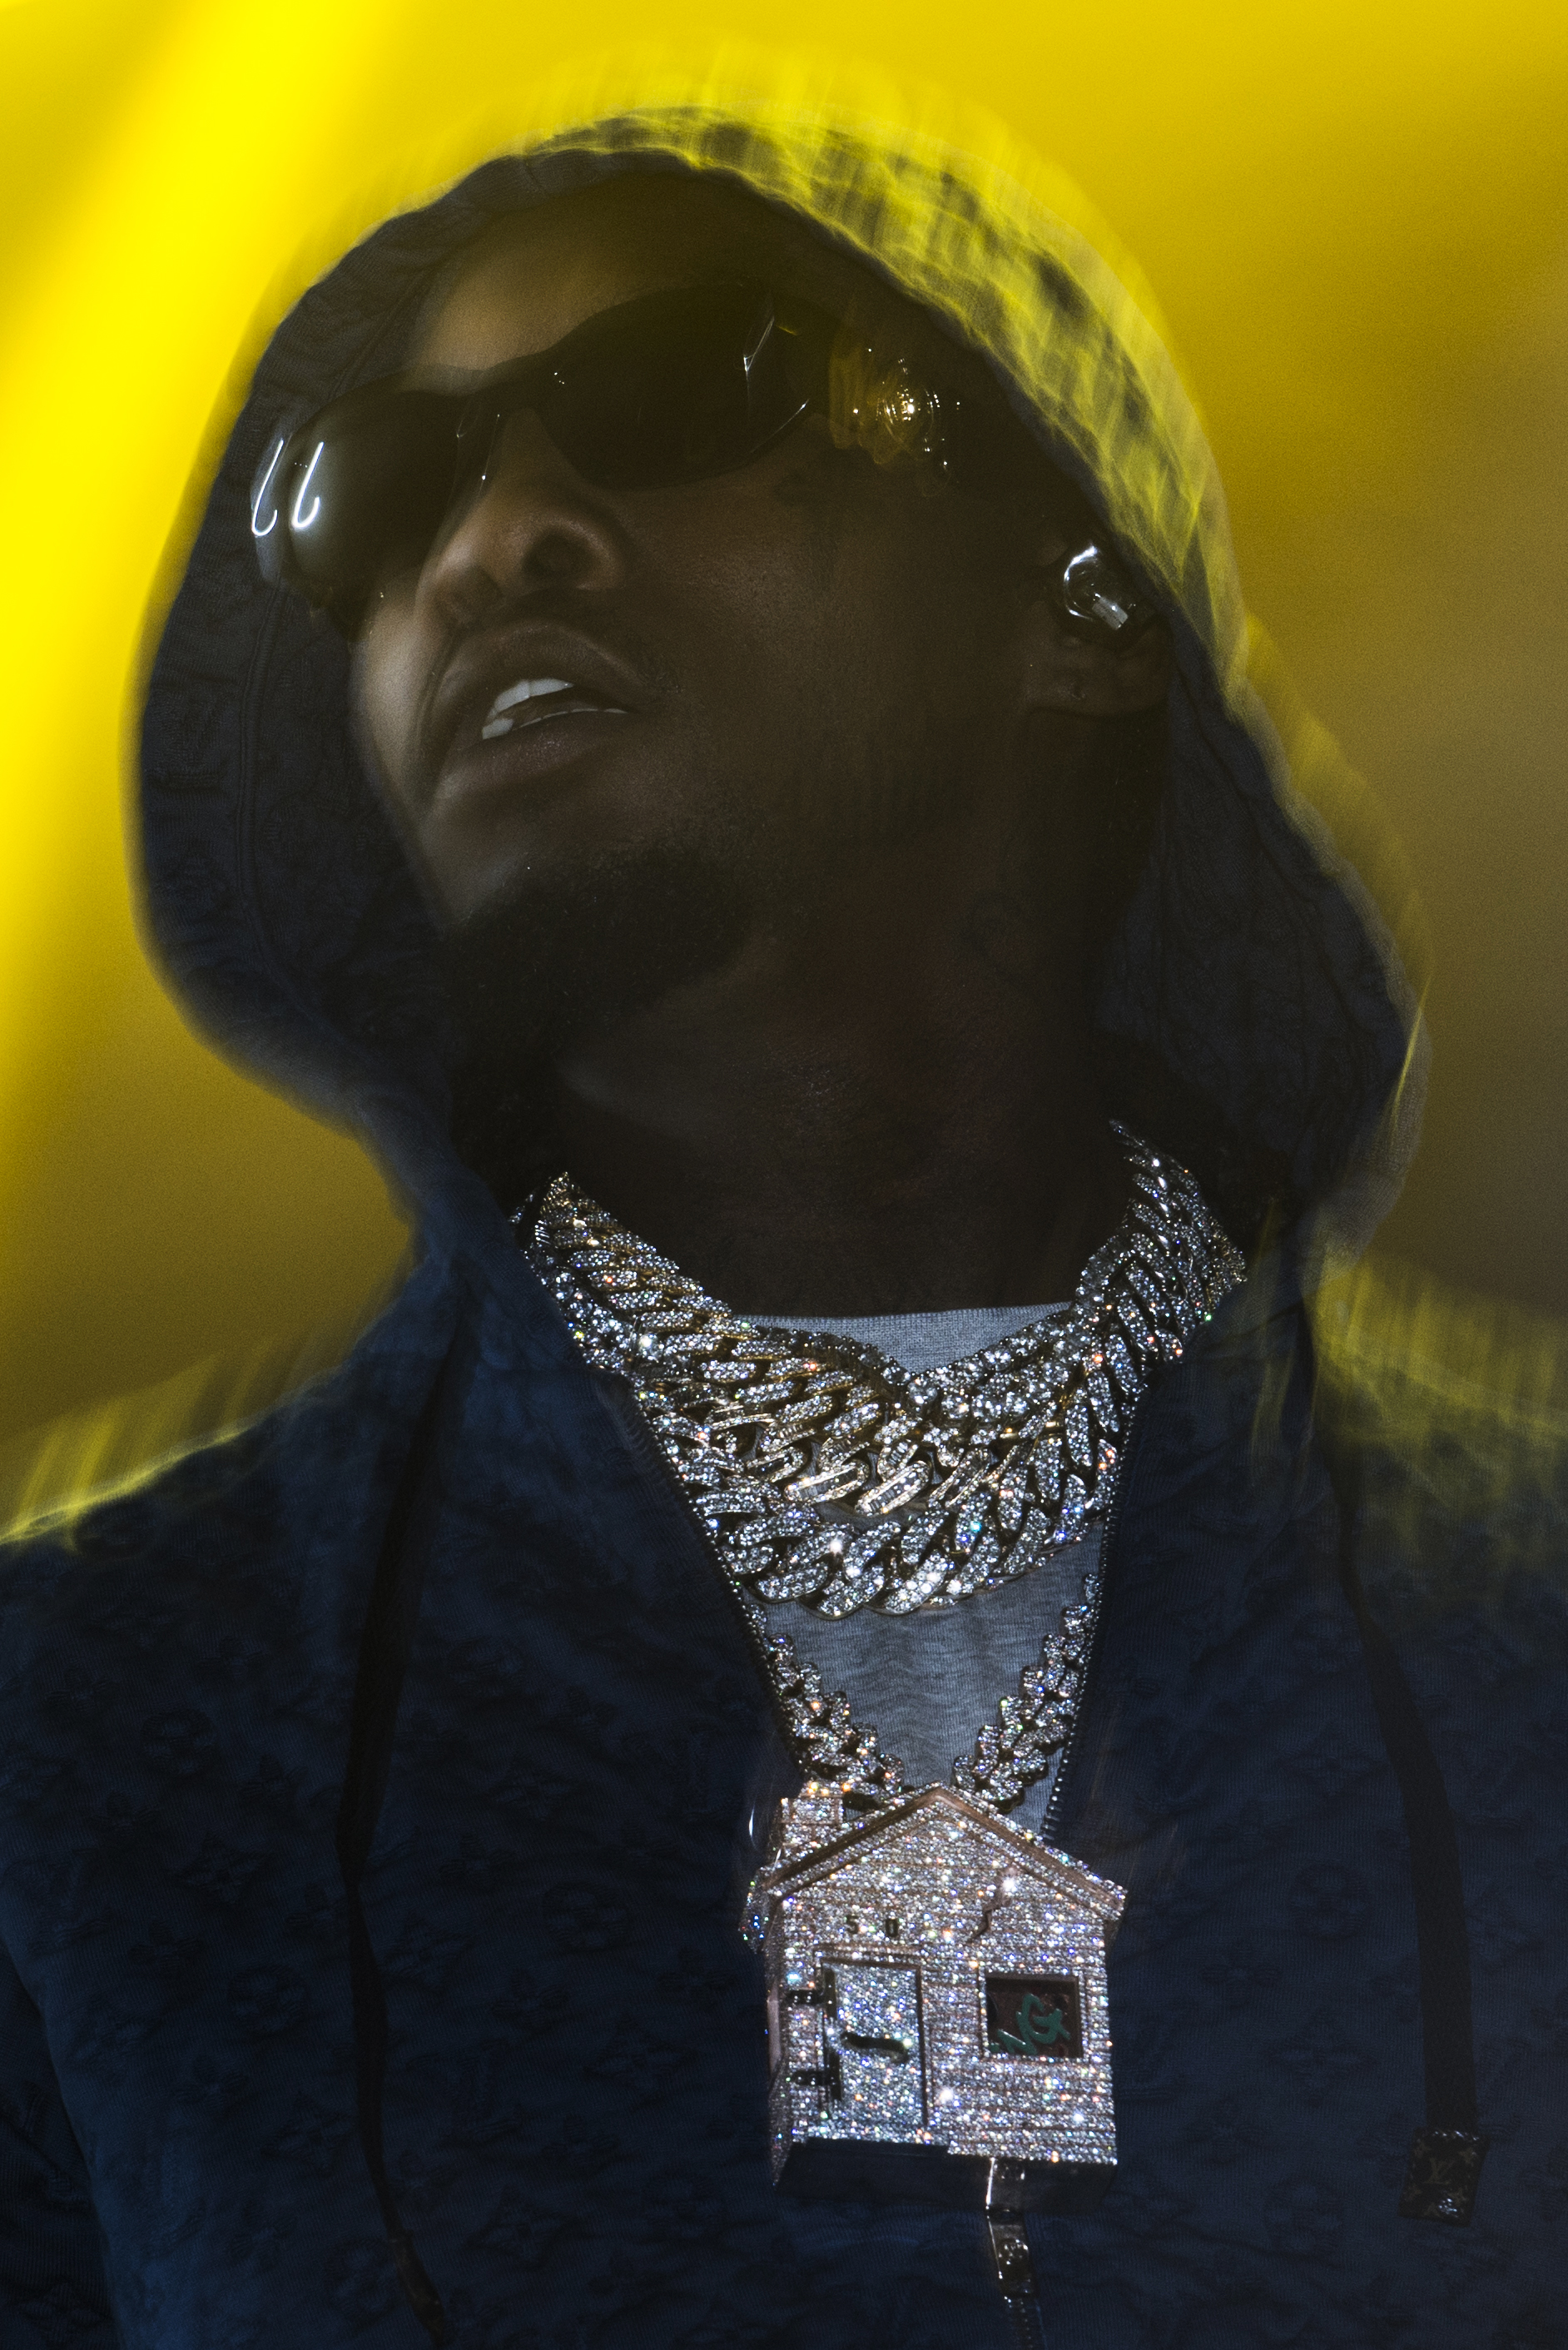 Offset photographed by Aviva Klein- copyright 2021